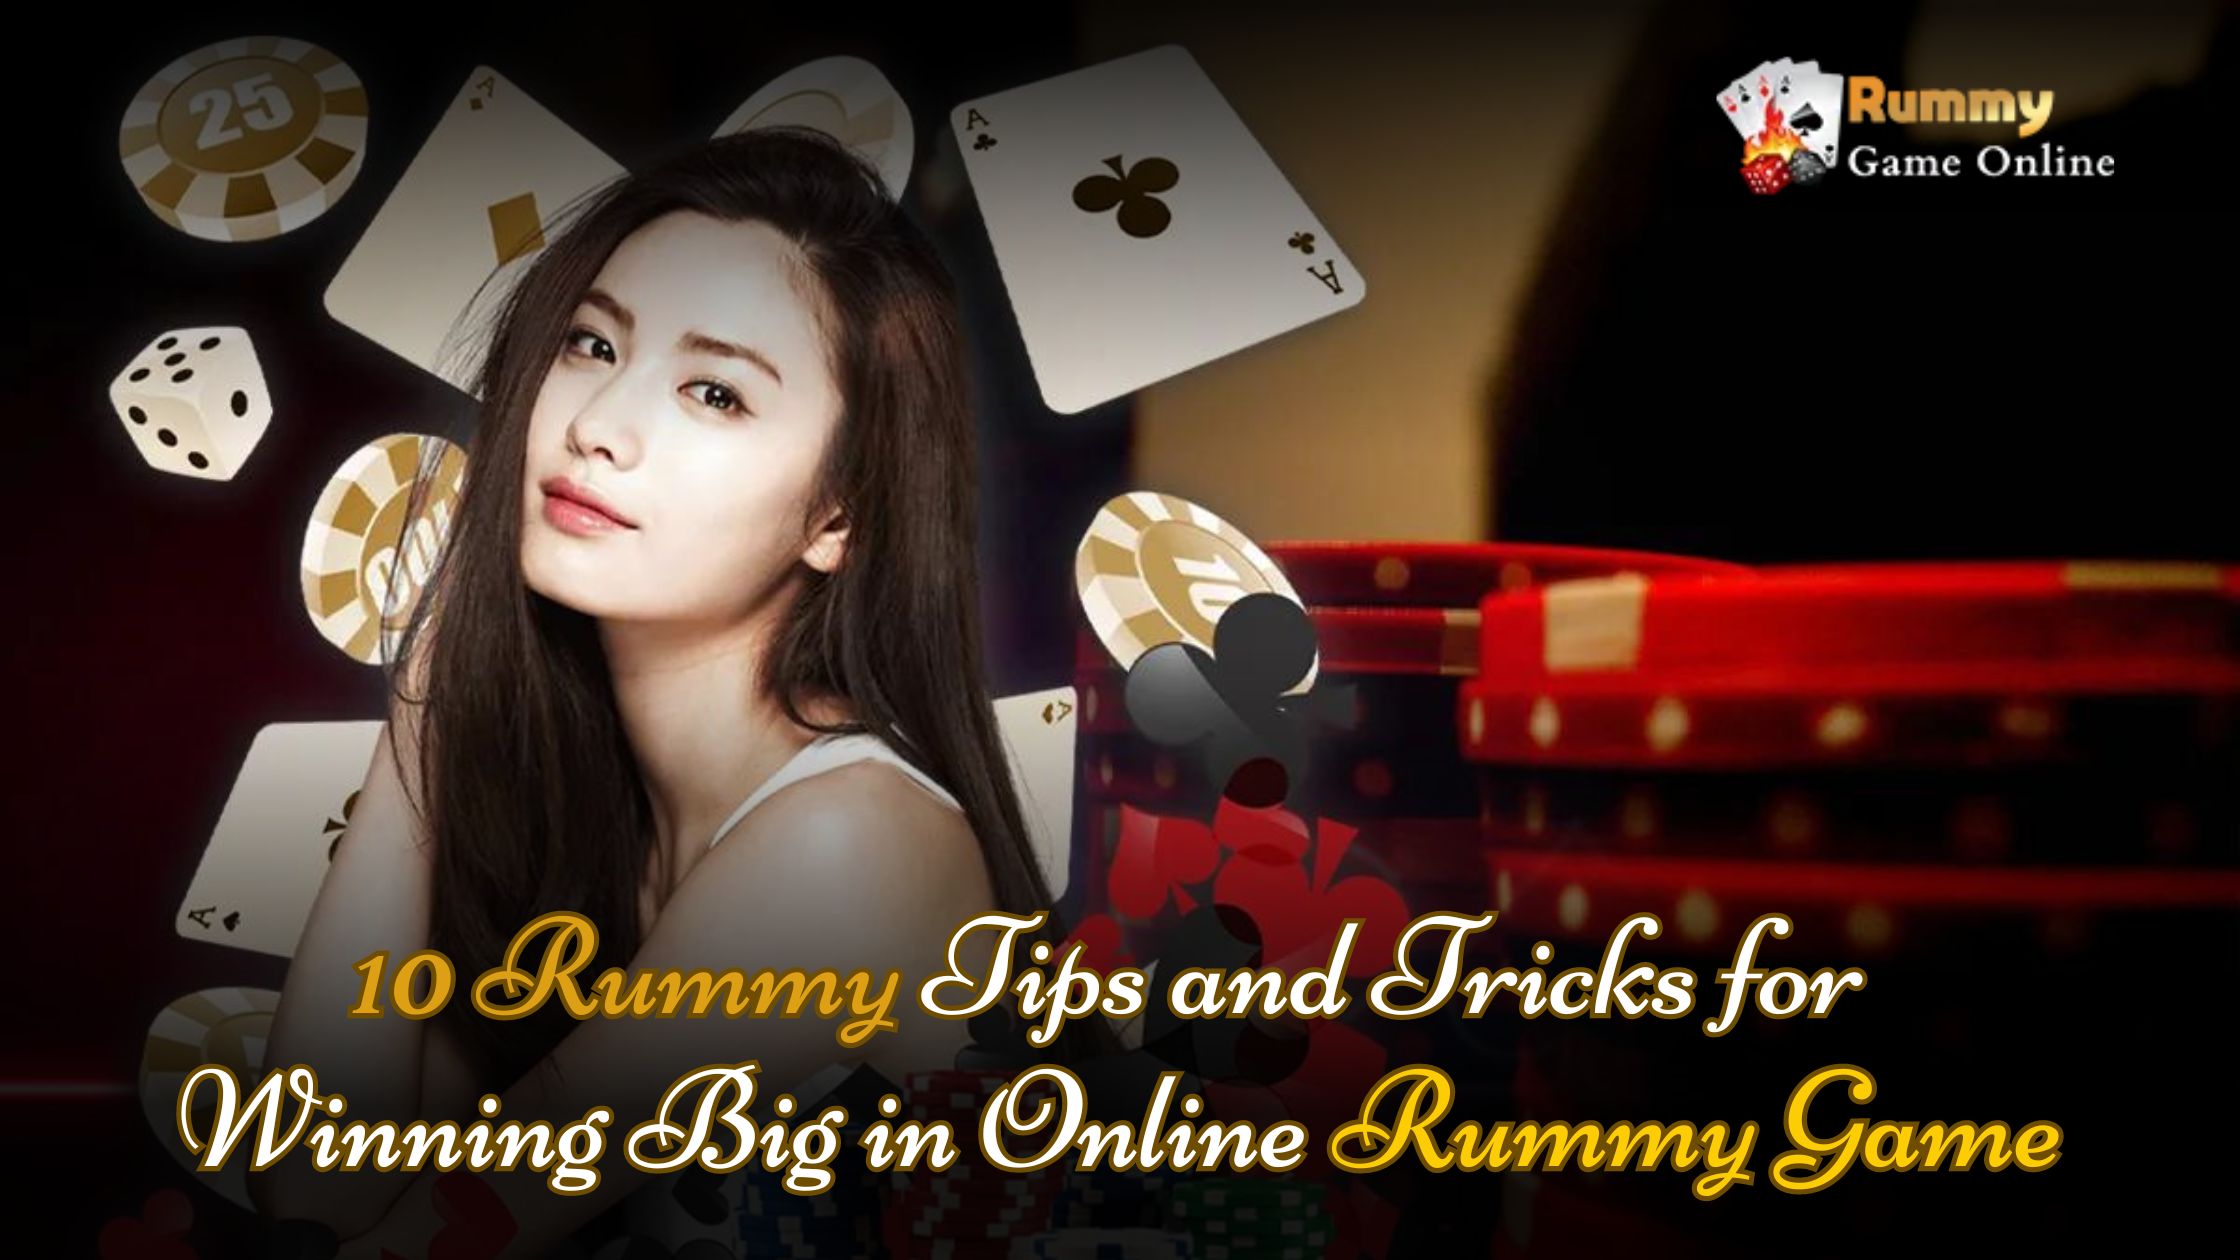 Rummy Tips And Tricks